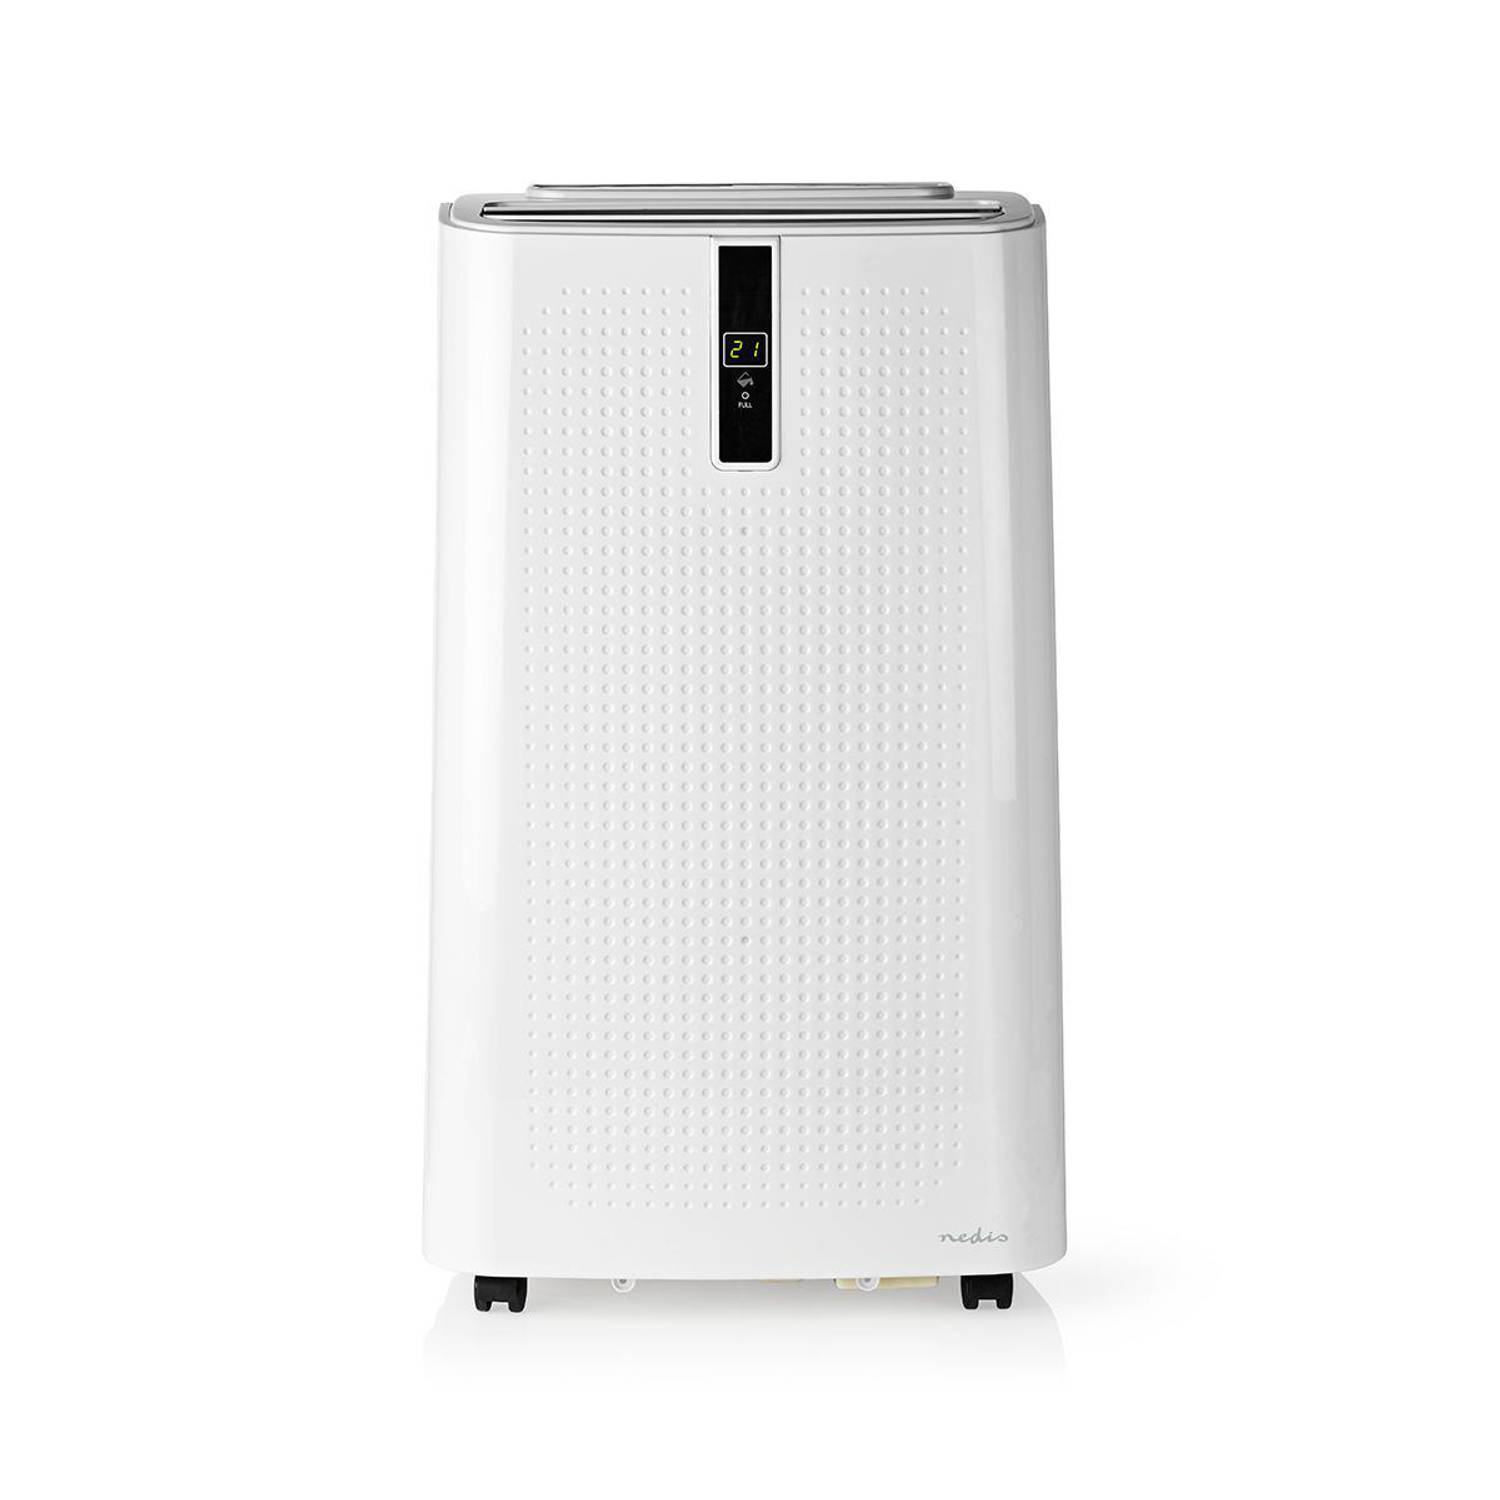 Nedis SmartLife 3-in-1 Airconditioner - WIFIACMB1WT12